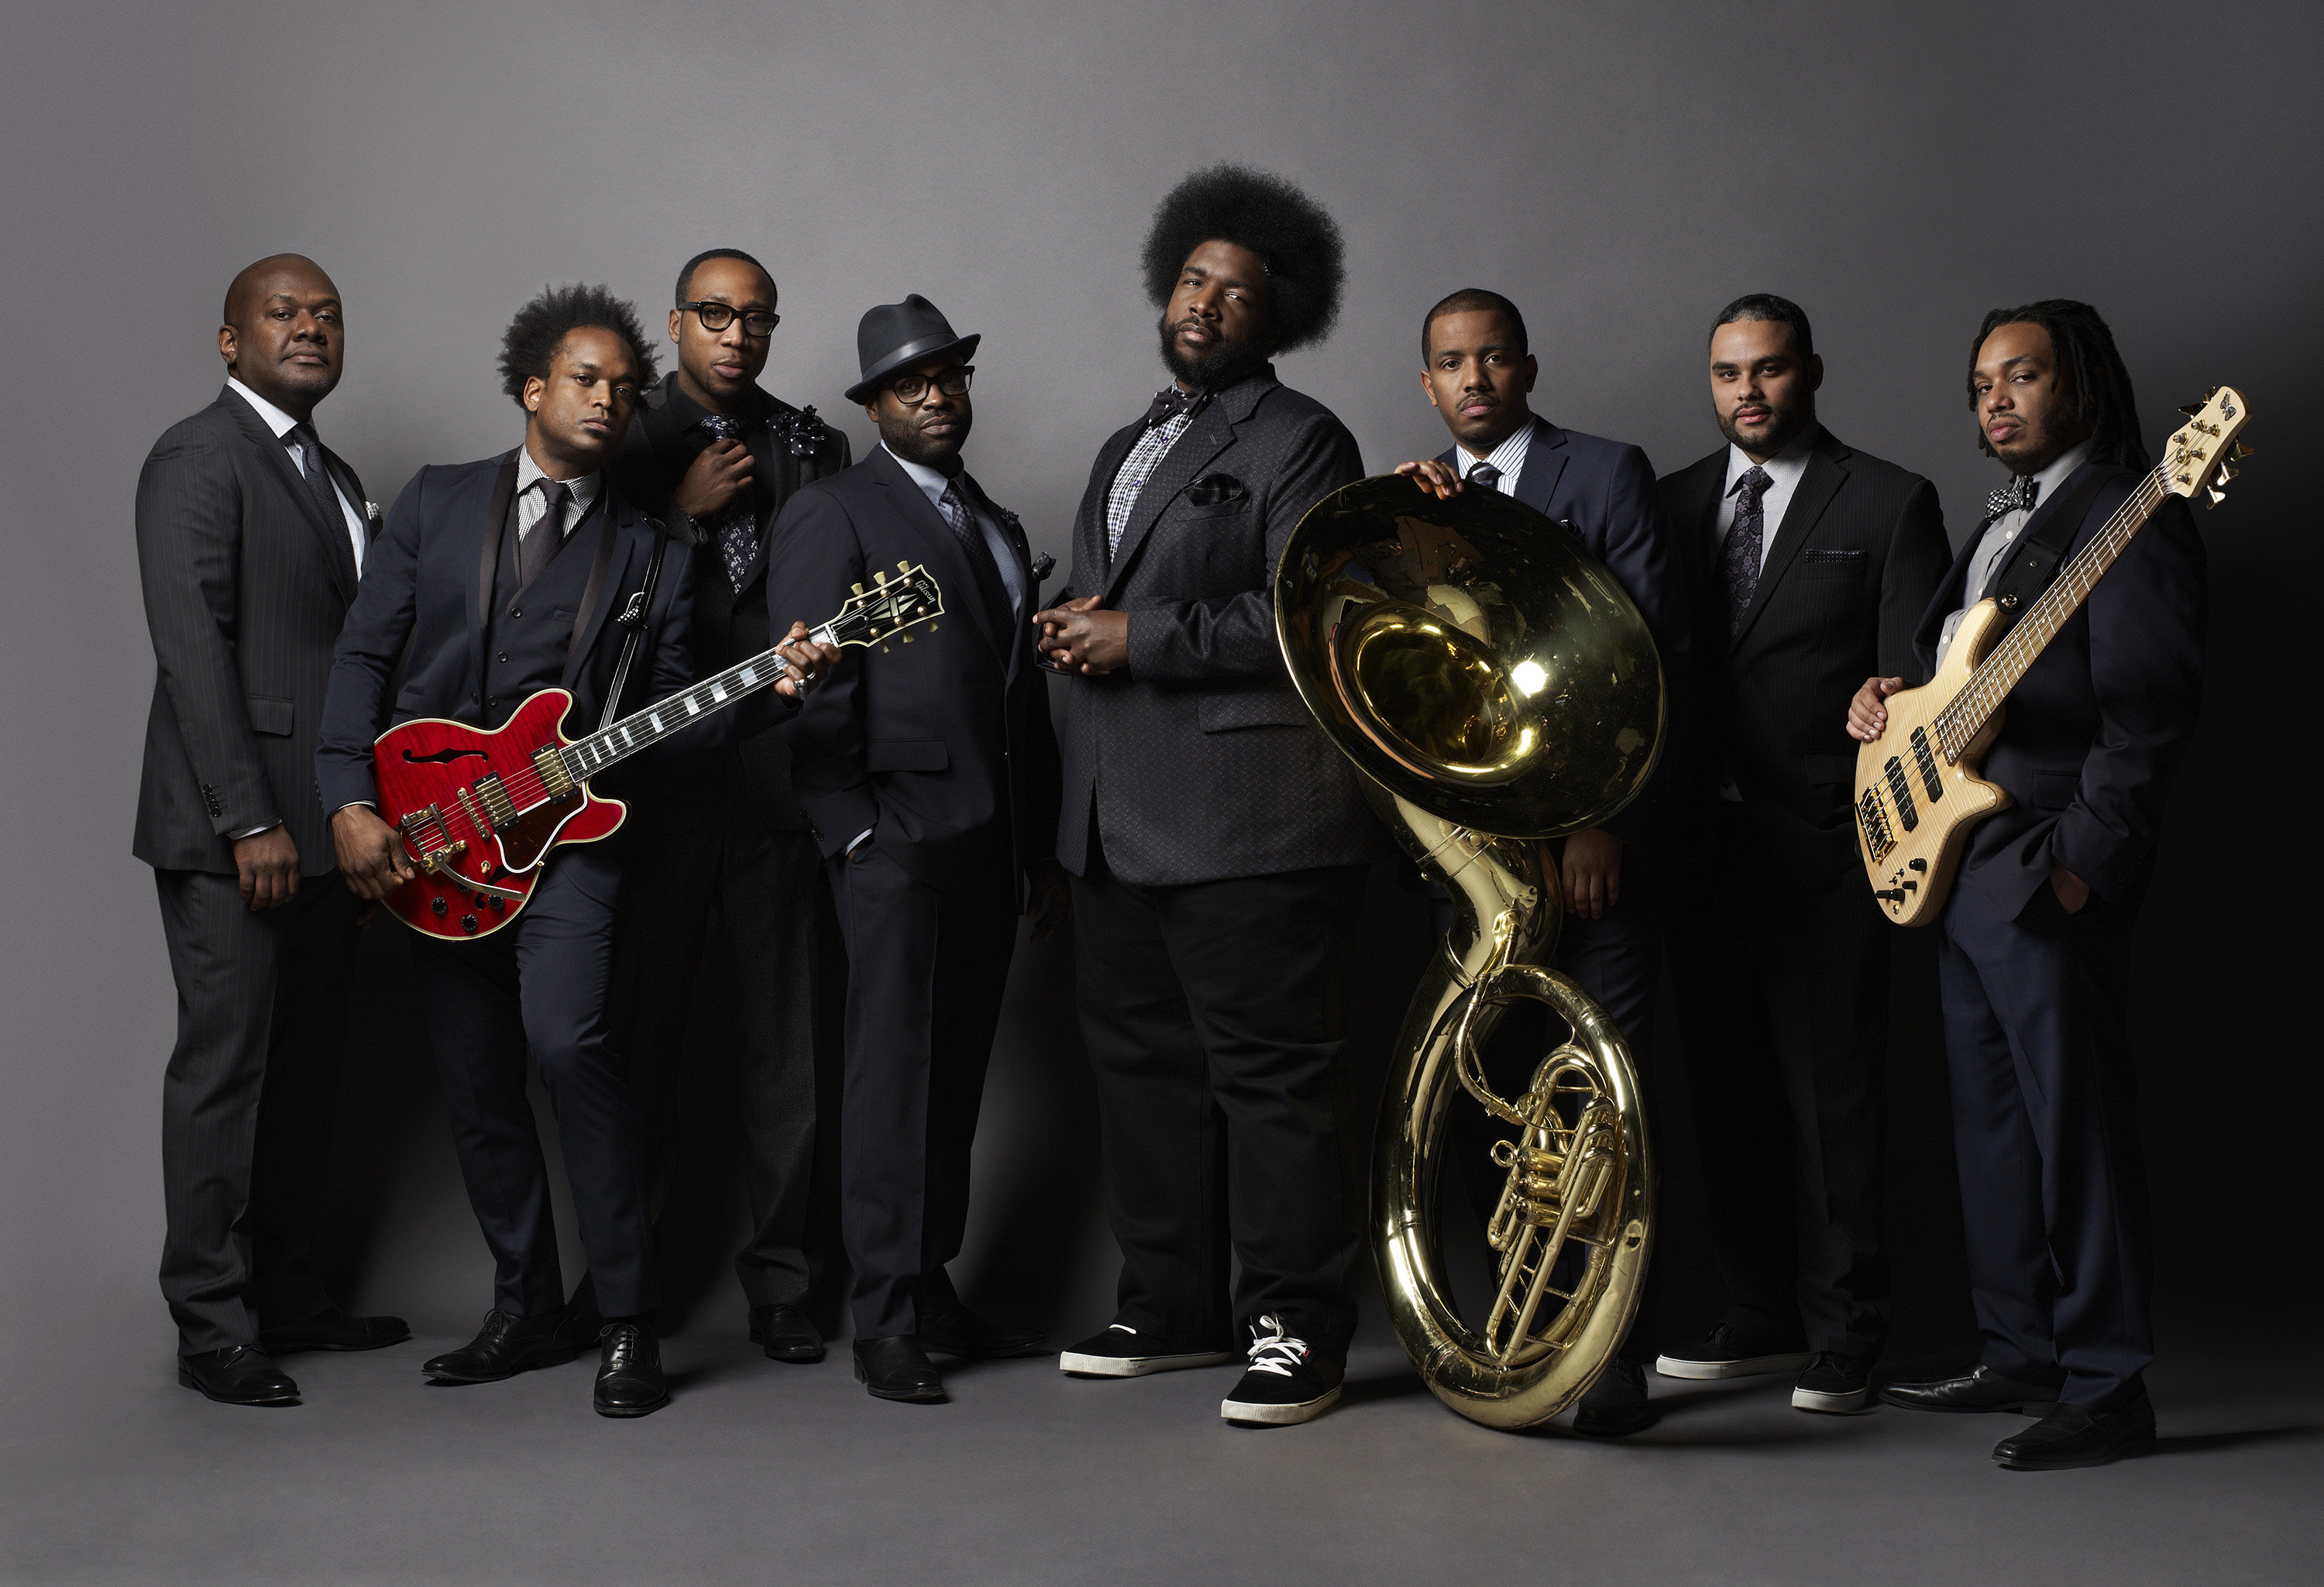 Kellogg’s® Partners with The Roots